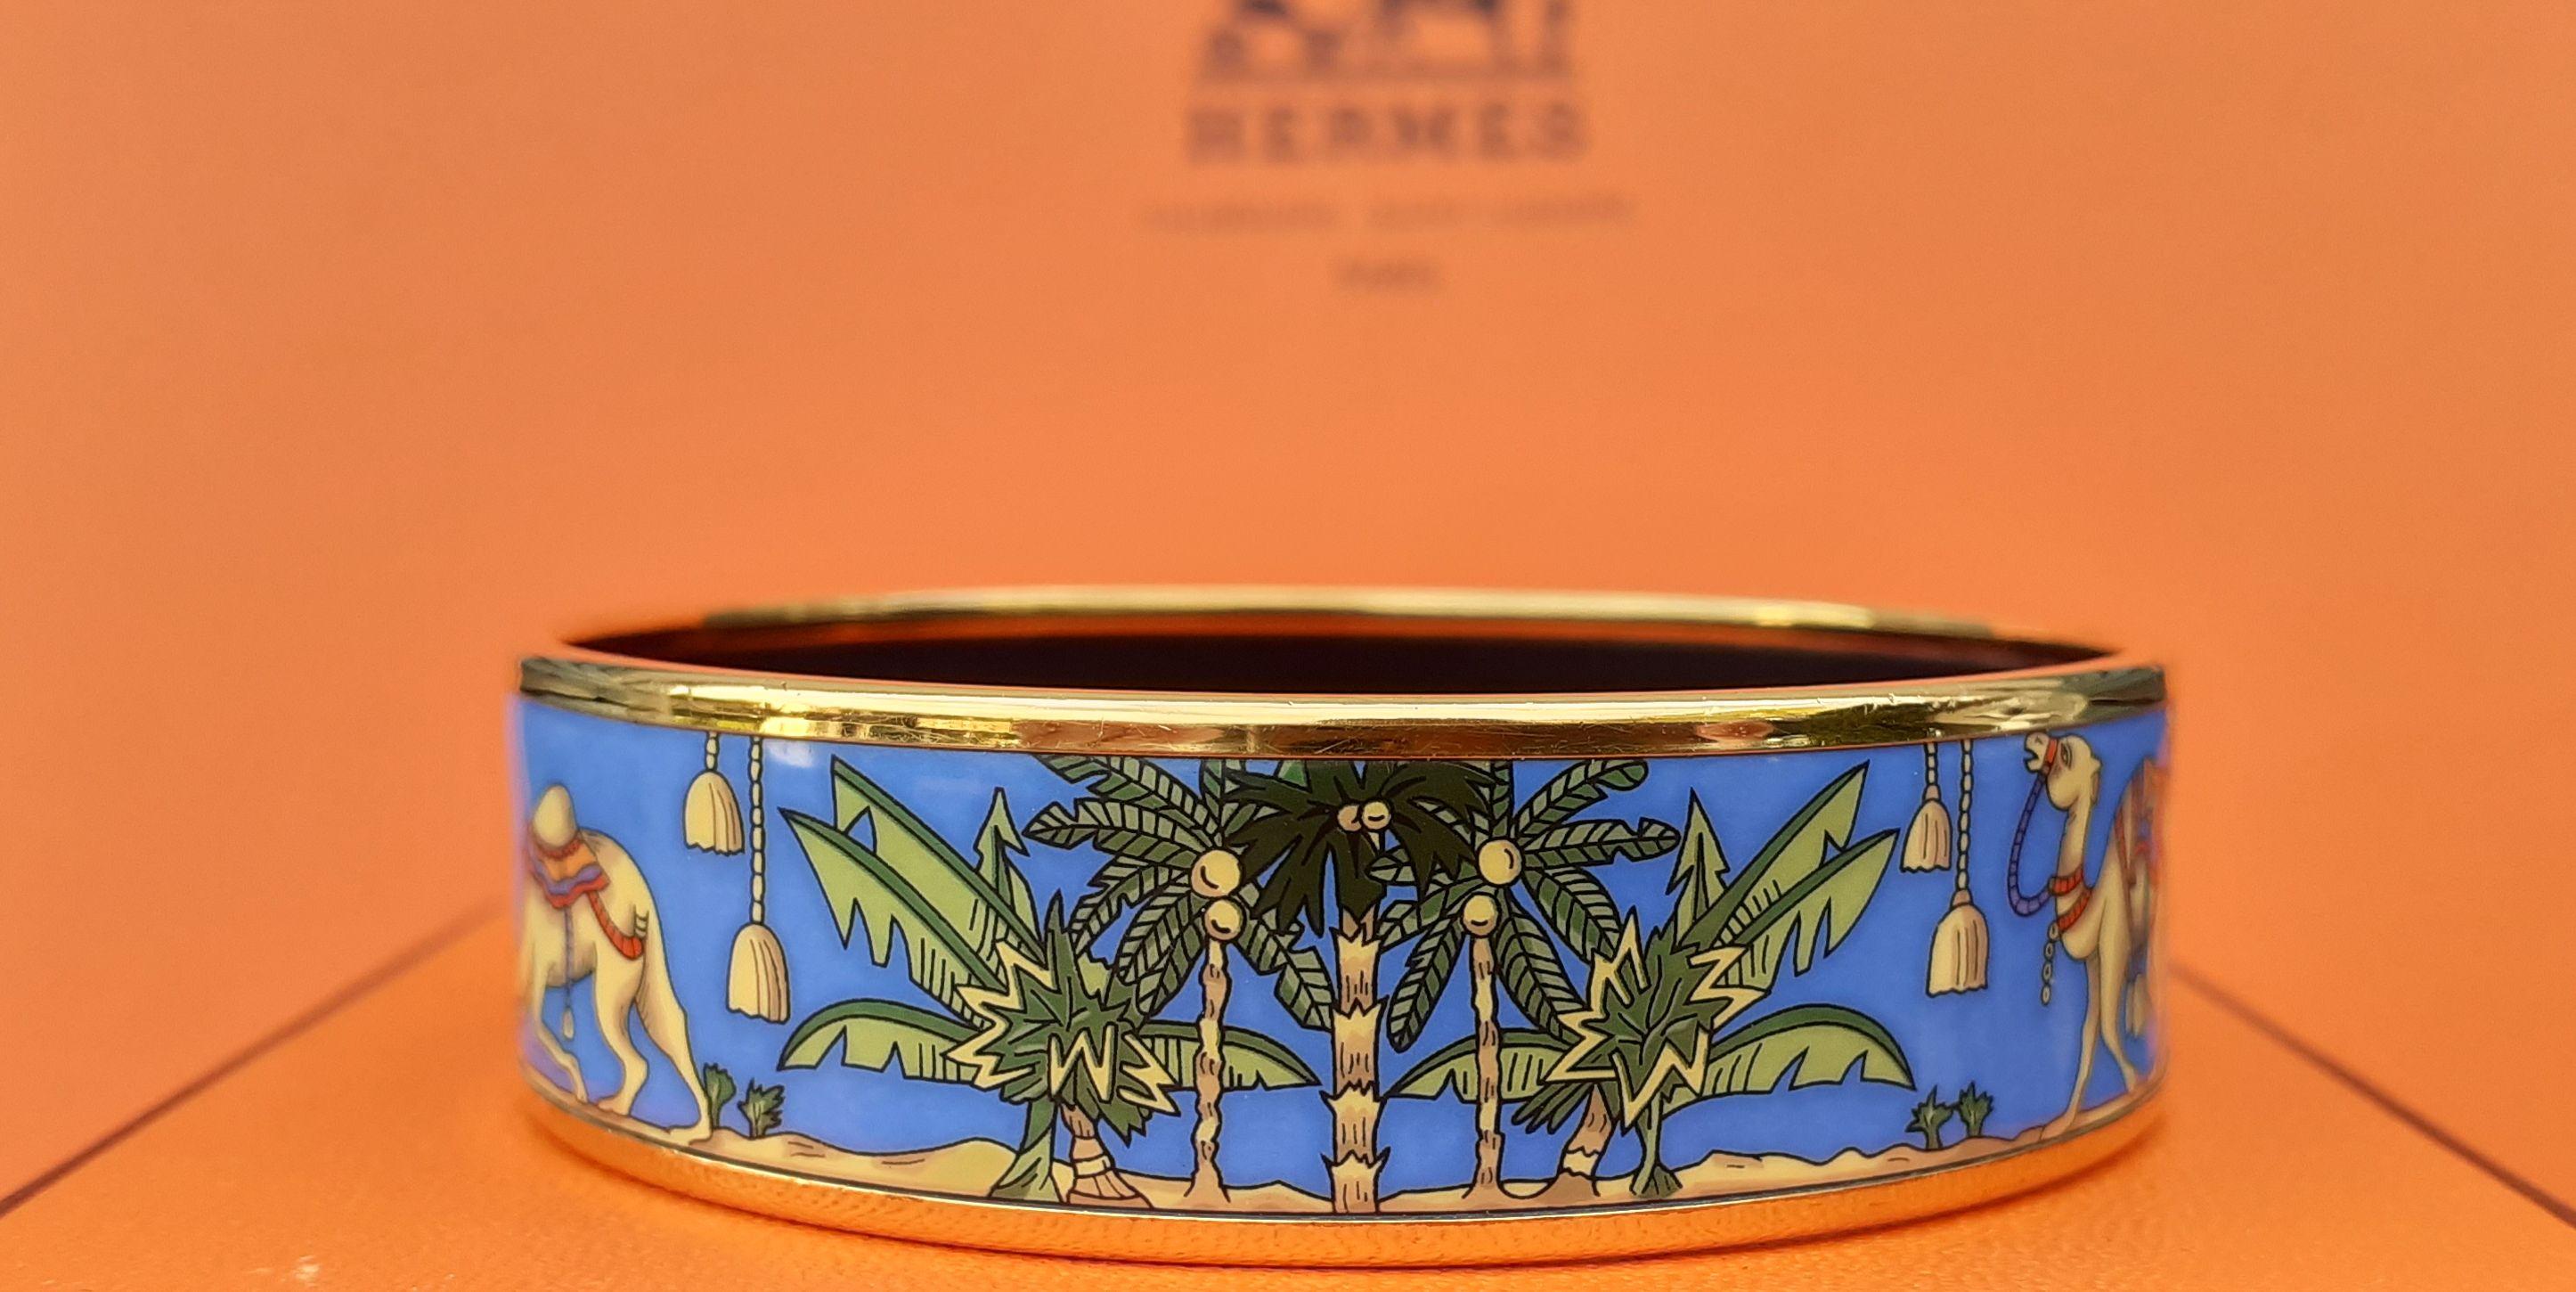 Beautiful and RARE Authentic Hermès Bracelet

Pattern: Camels in Desert (Camels and Palm Trees)

Hard to find !

Made in Austria + E

Made of printed Enamel and Yellow Gold Plated Hardware

Colorways: Blue, Beige,, Green, Red

Fine golden details on